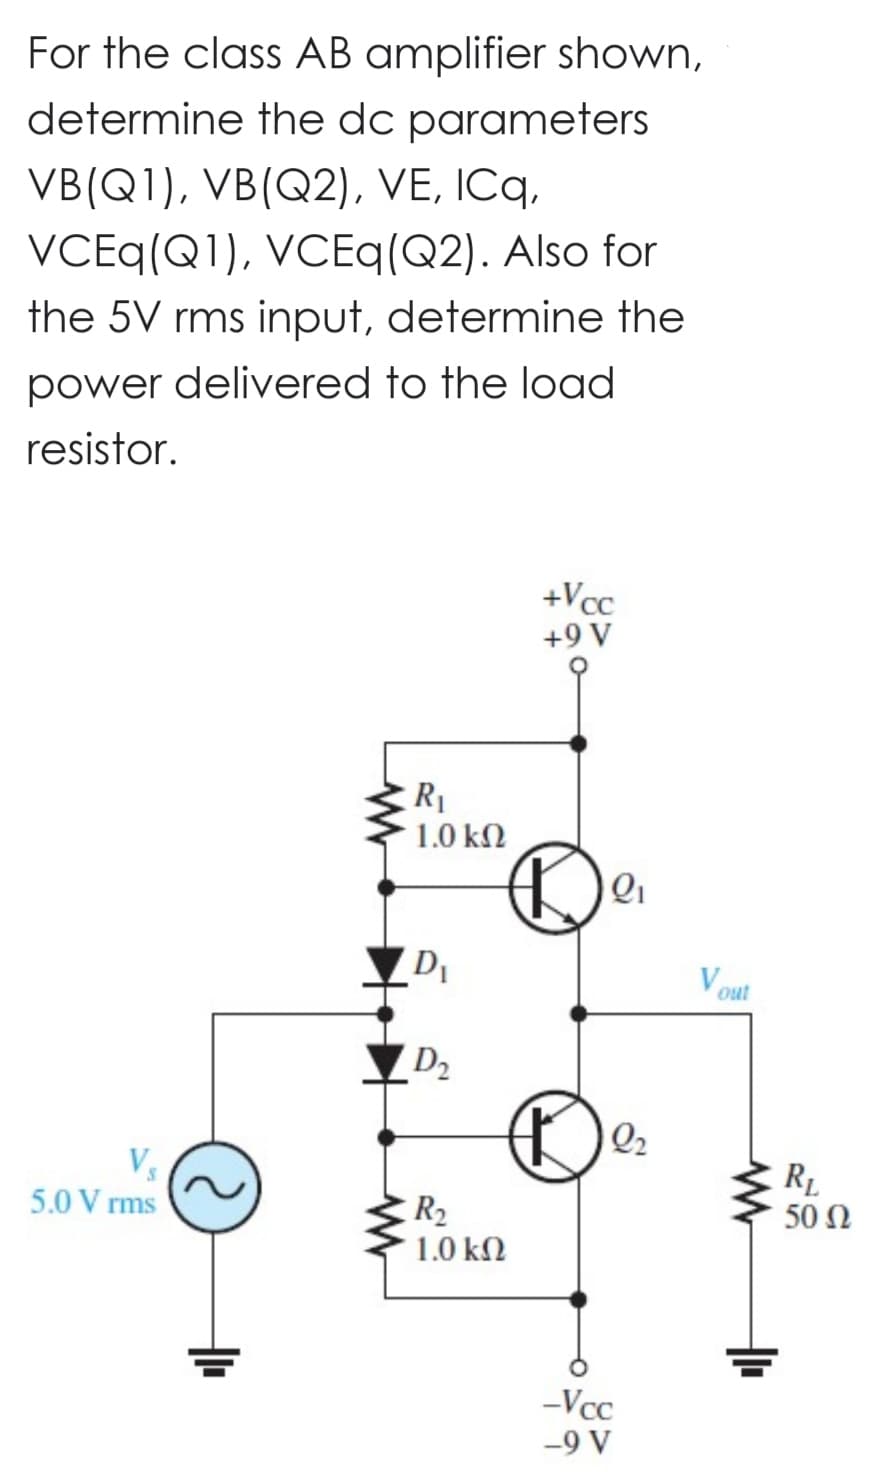 For the class AB amplifier shown,
determine the dc parameters
VB(Q1), VB(Q2), VE, ICq,
VCEq(Q1), VCEq(Q2). Also for
the 5V rms input, determine the
power delivered to the load
resistor.
5.0 Vrms
2
+
R₁
1.0 ΚΩ
D₁
D₂
+Vcc
+9 V
De
R₂
1.0 ΚΩ
2₂
-Vcc
-9 V
Vout
www
+
RL
50 Ω